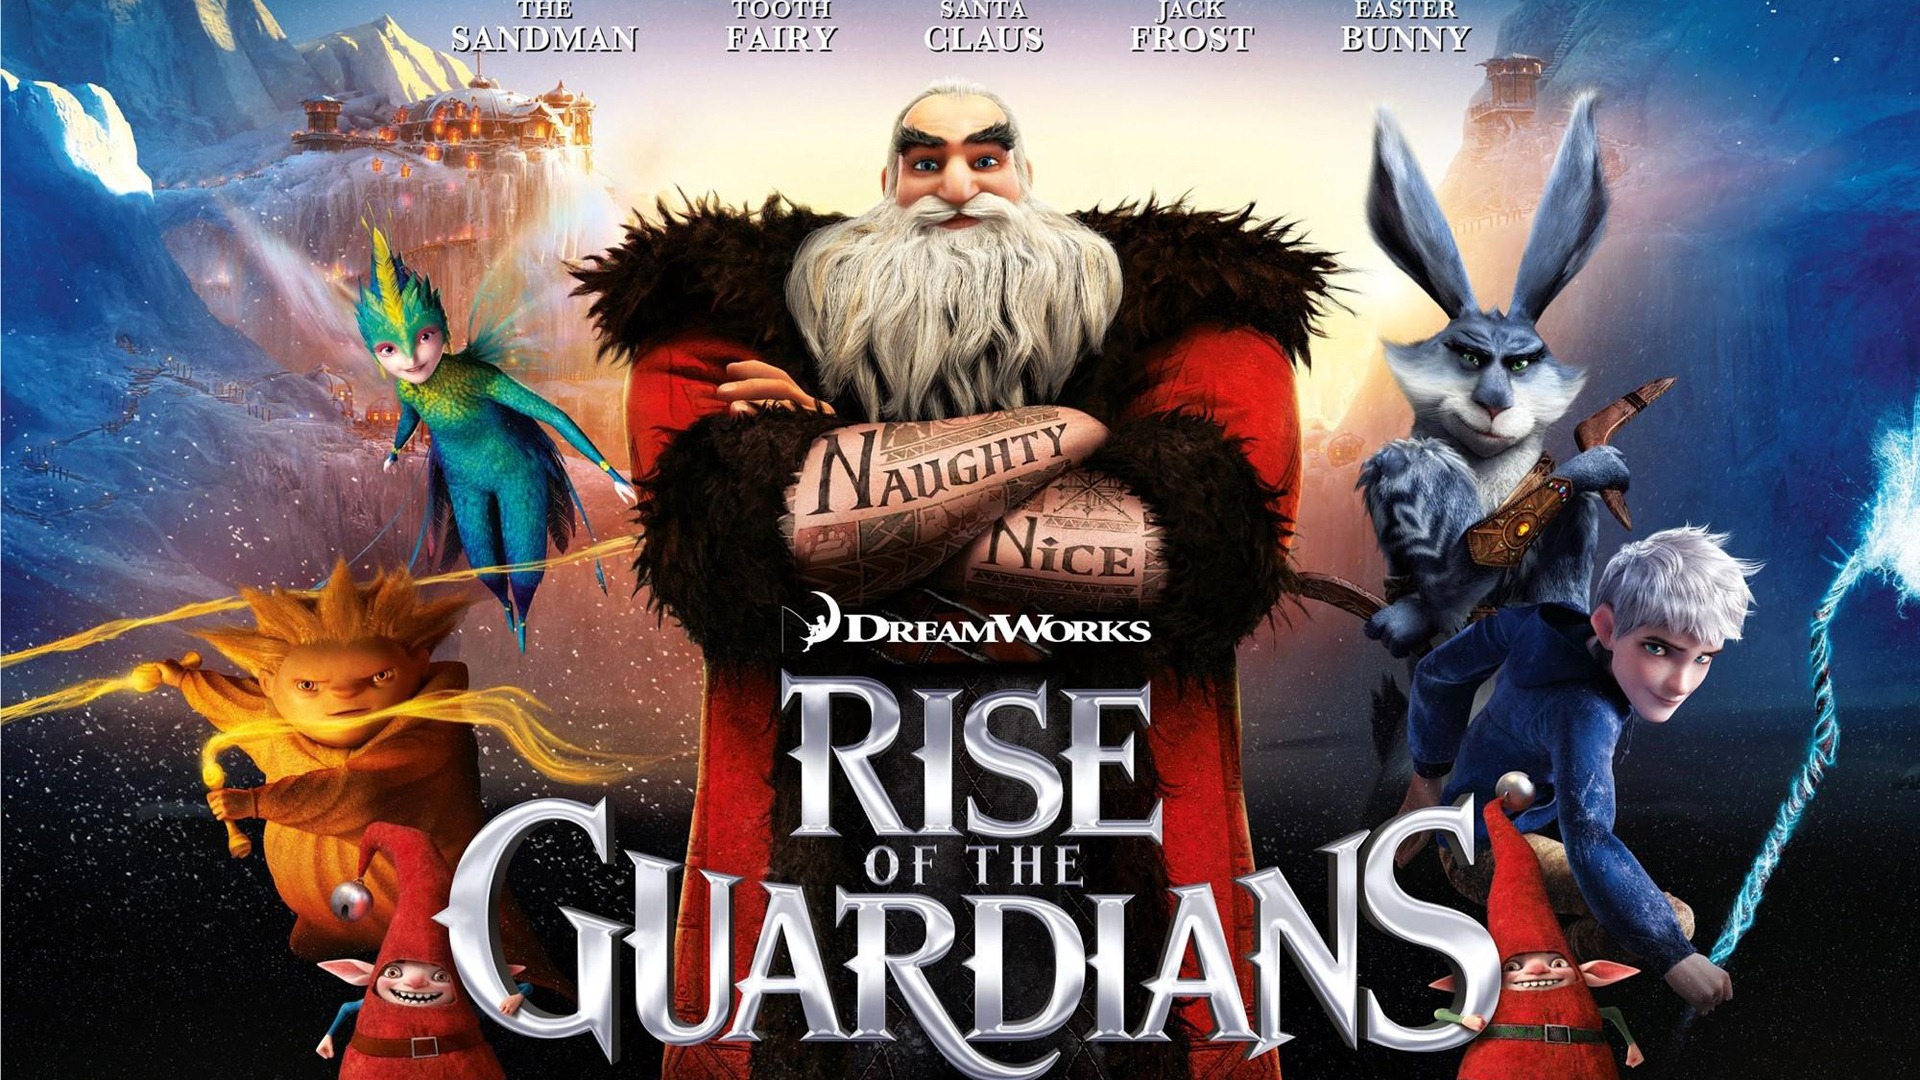 Rise of the Guardians 守護者聯盟 高清壁紙 #11 - 1920x1080